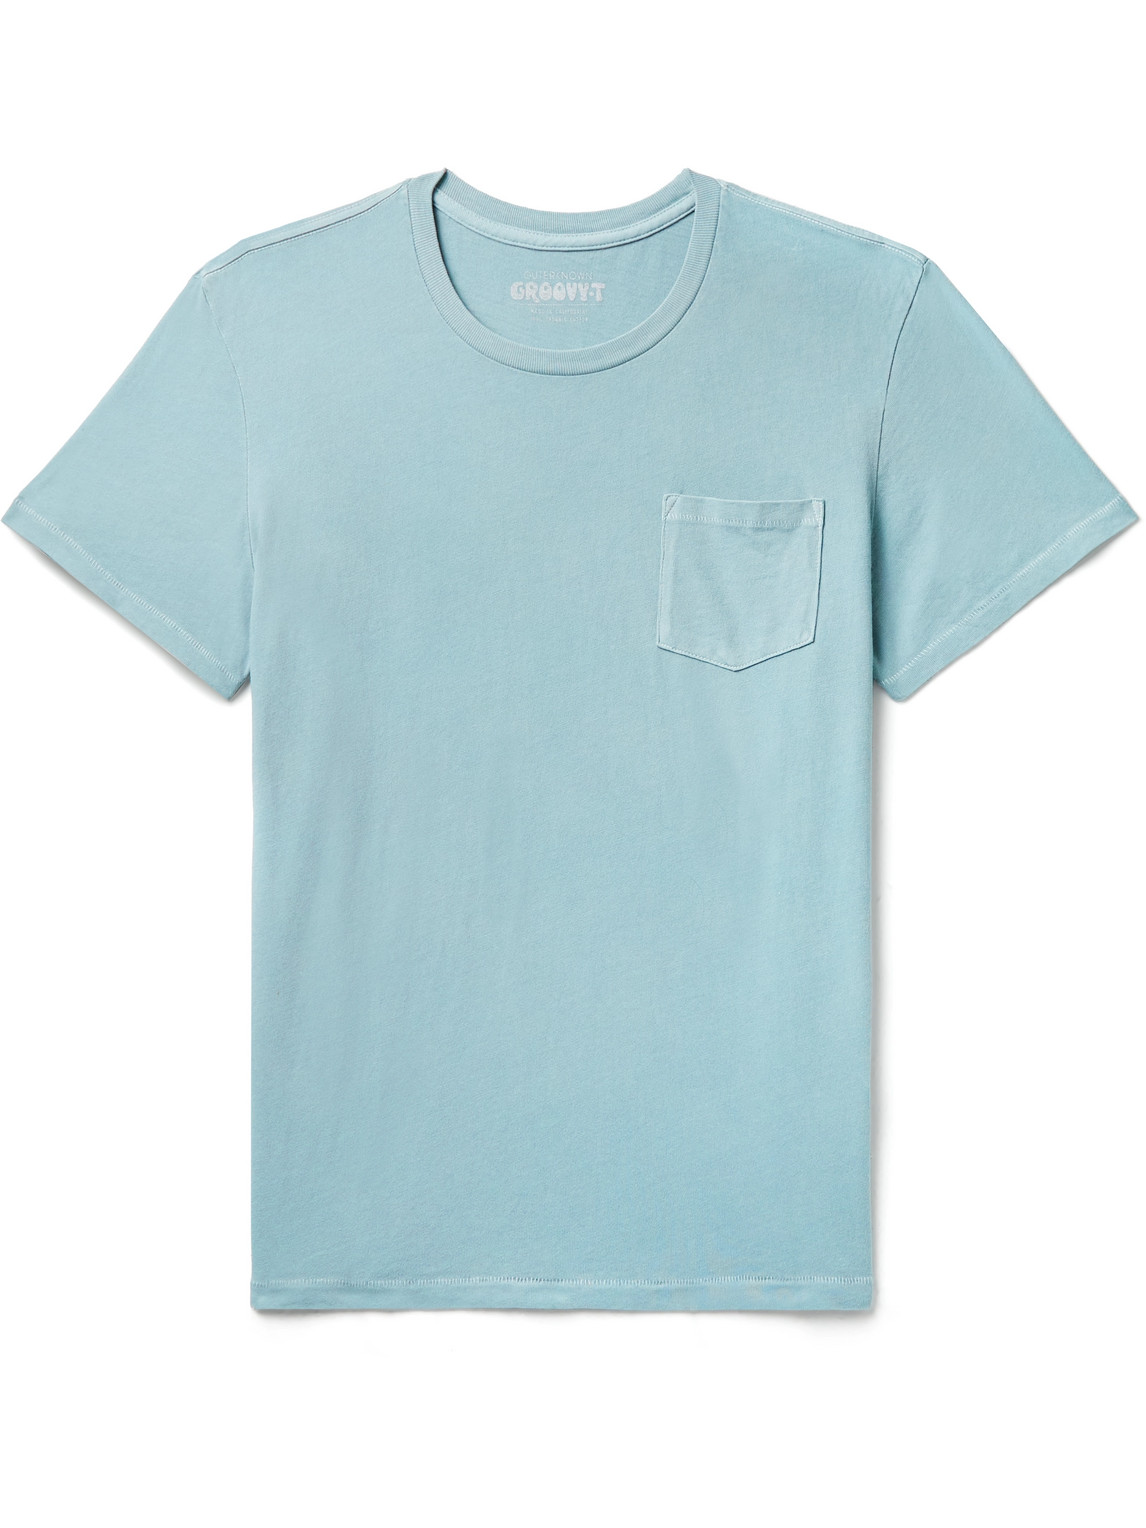 Outerknown Groovy Organic Cotton-jersey T-shirt In Green